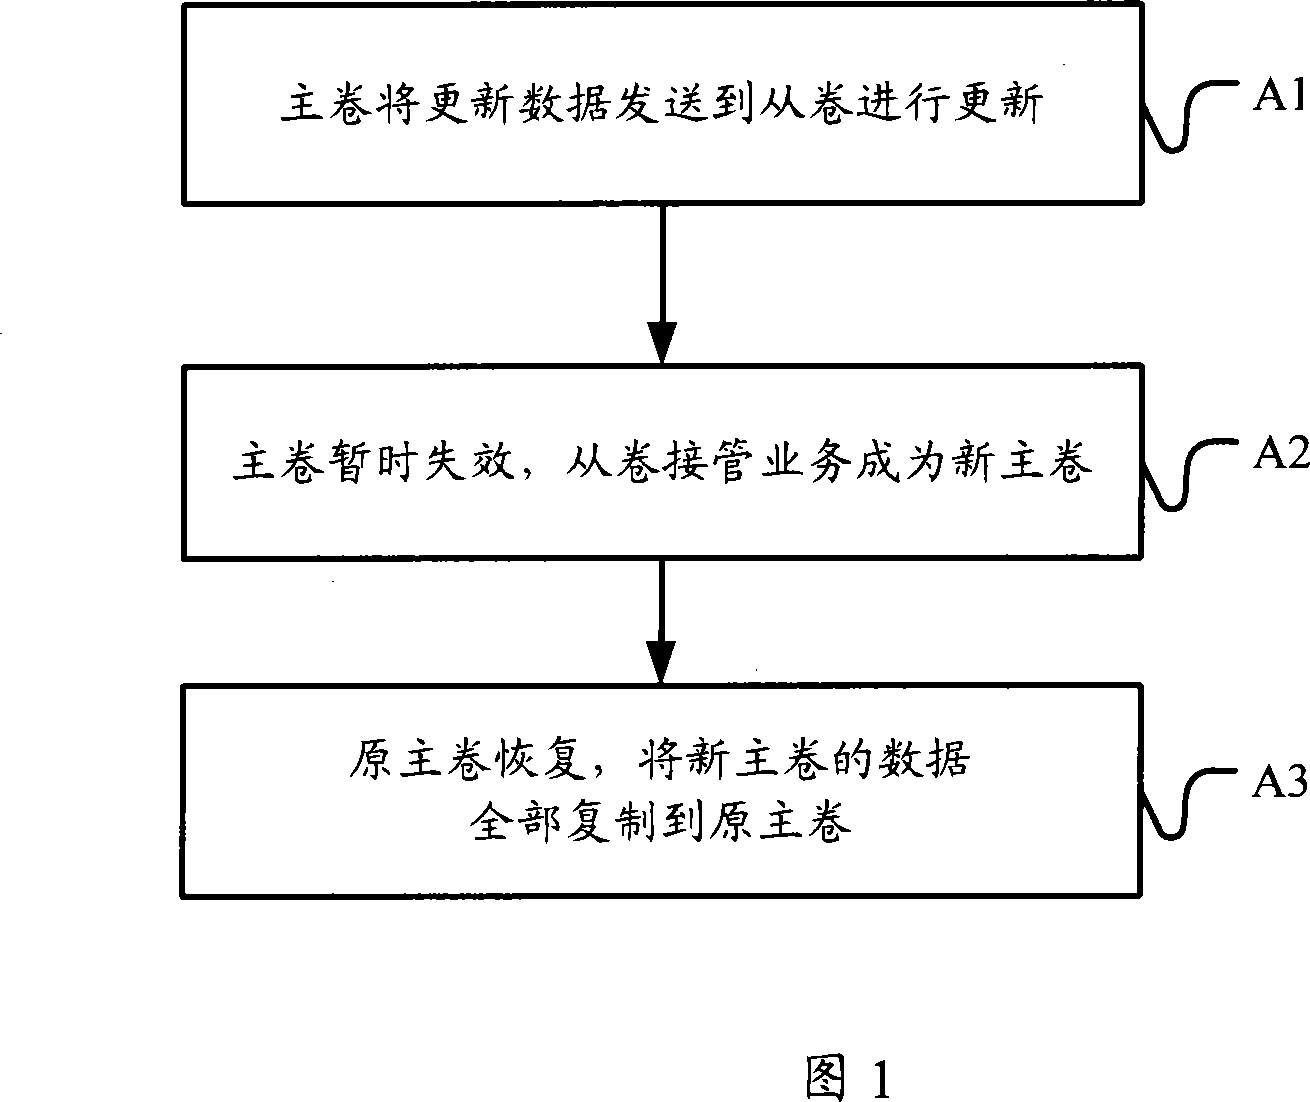 Image recovery method, storage equipment and network system